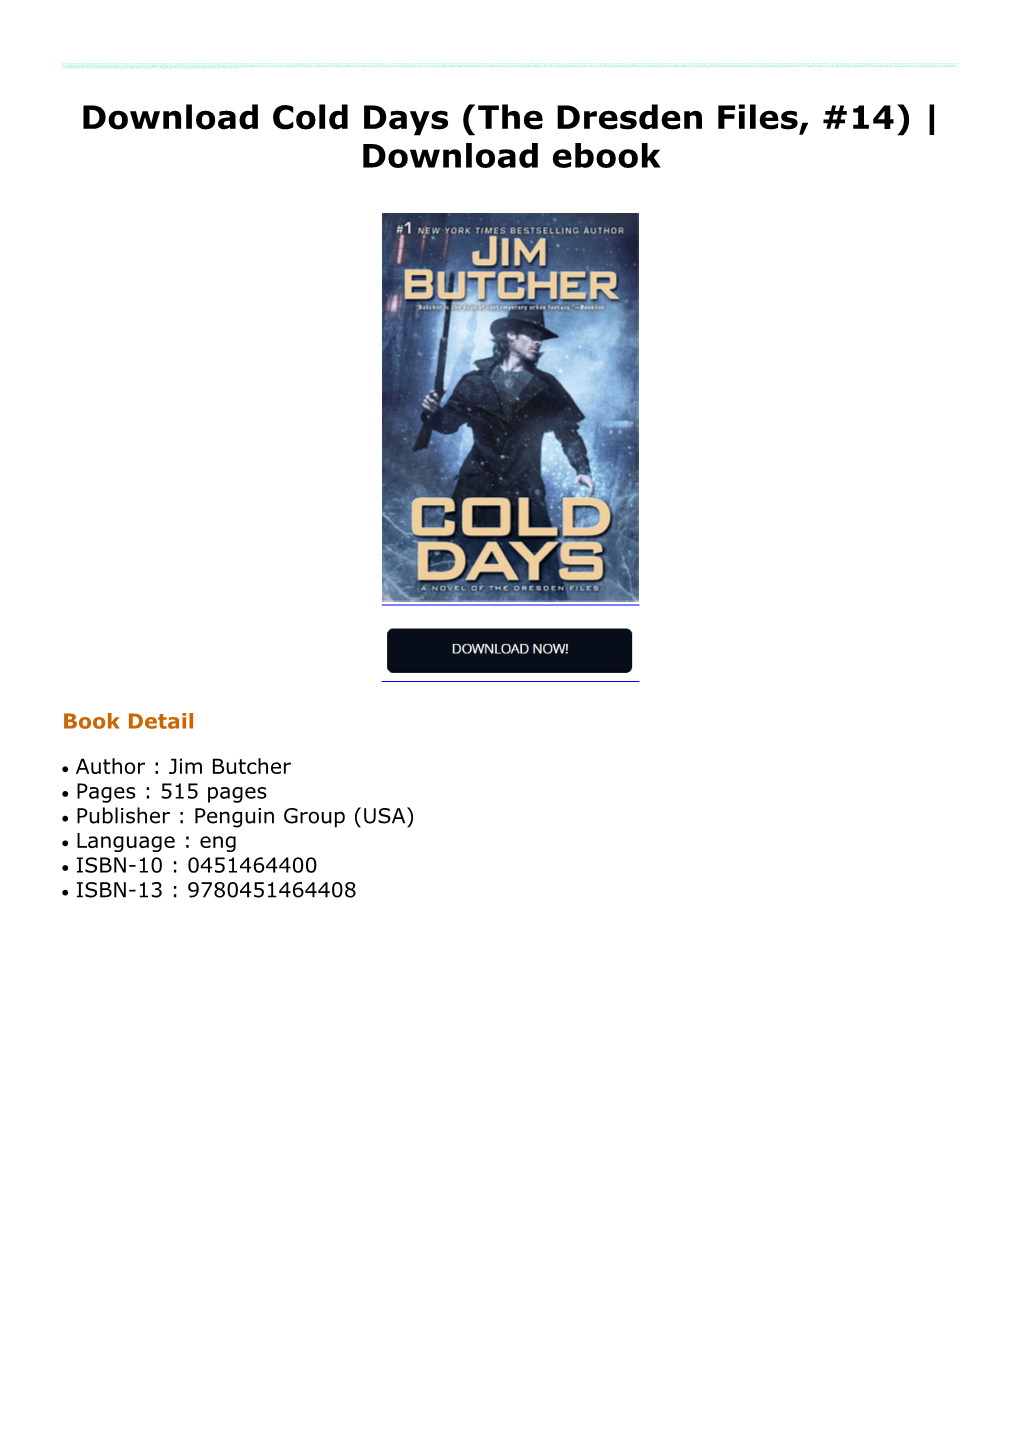 Download Cold Days (The Dresden Files, #14)